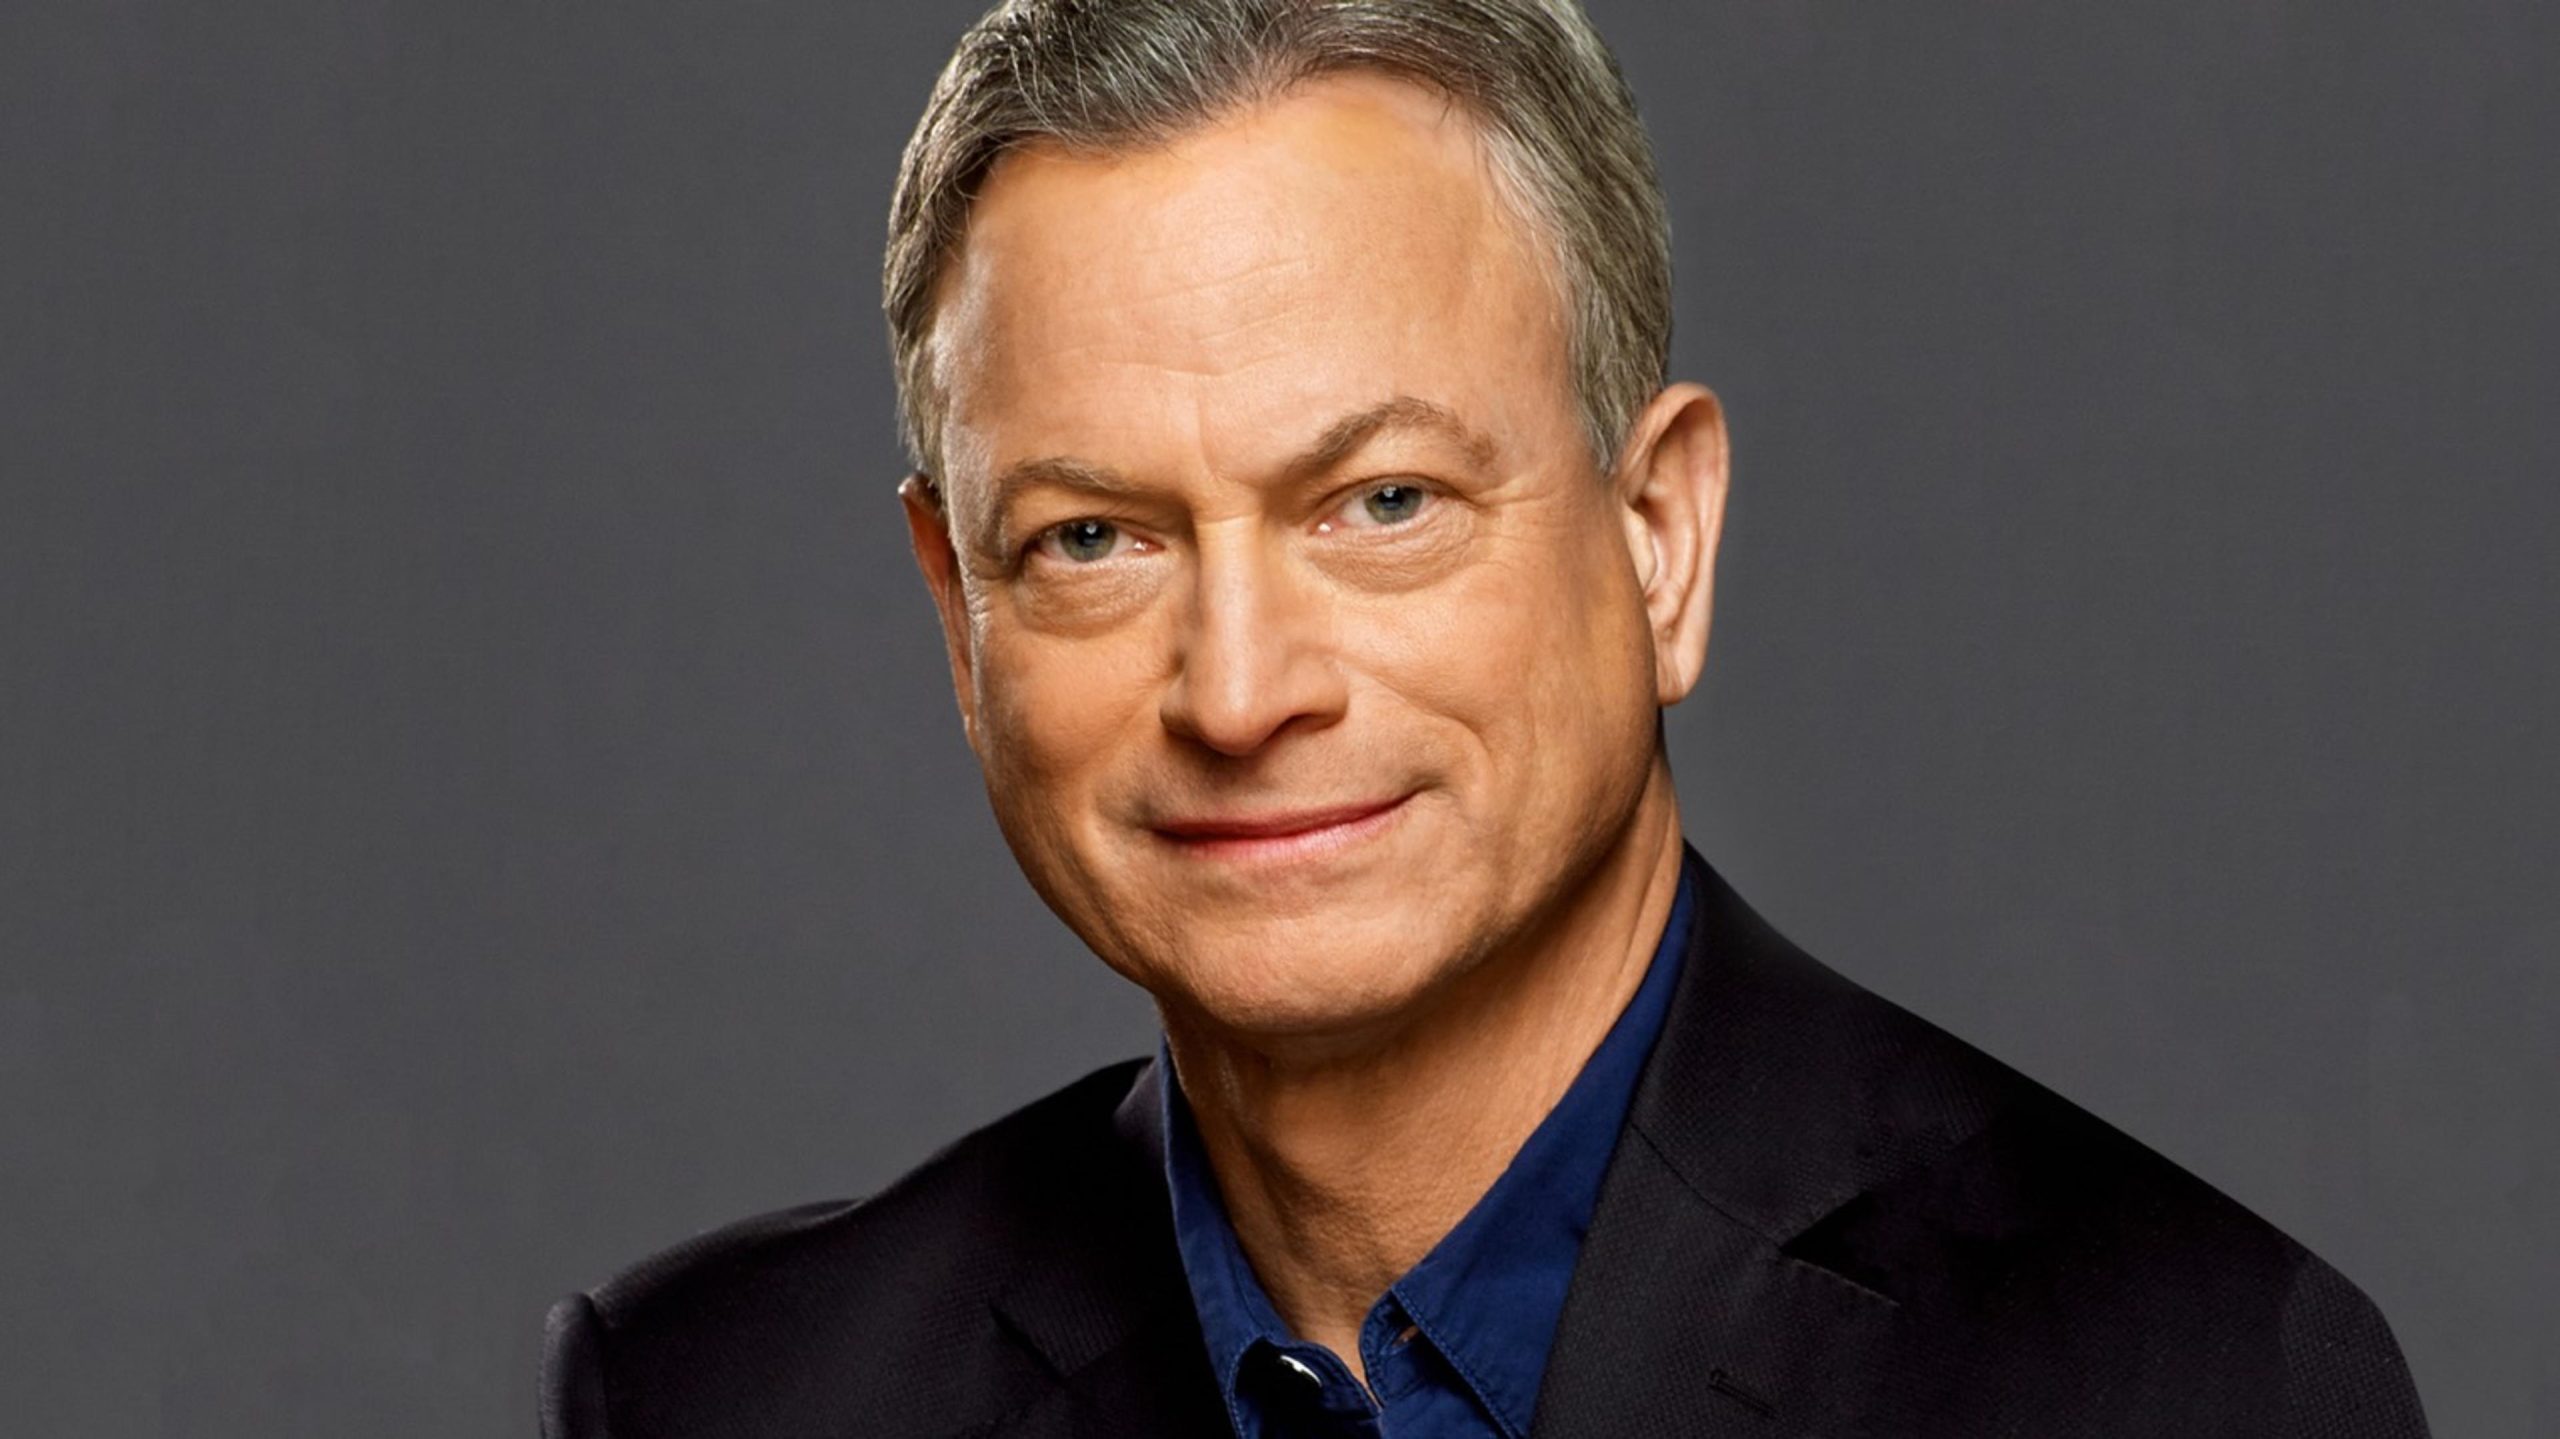 Gary Sinise Profile , Education , Networth or More